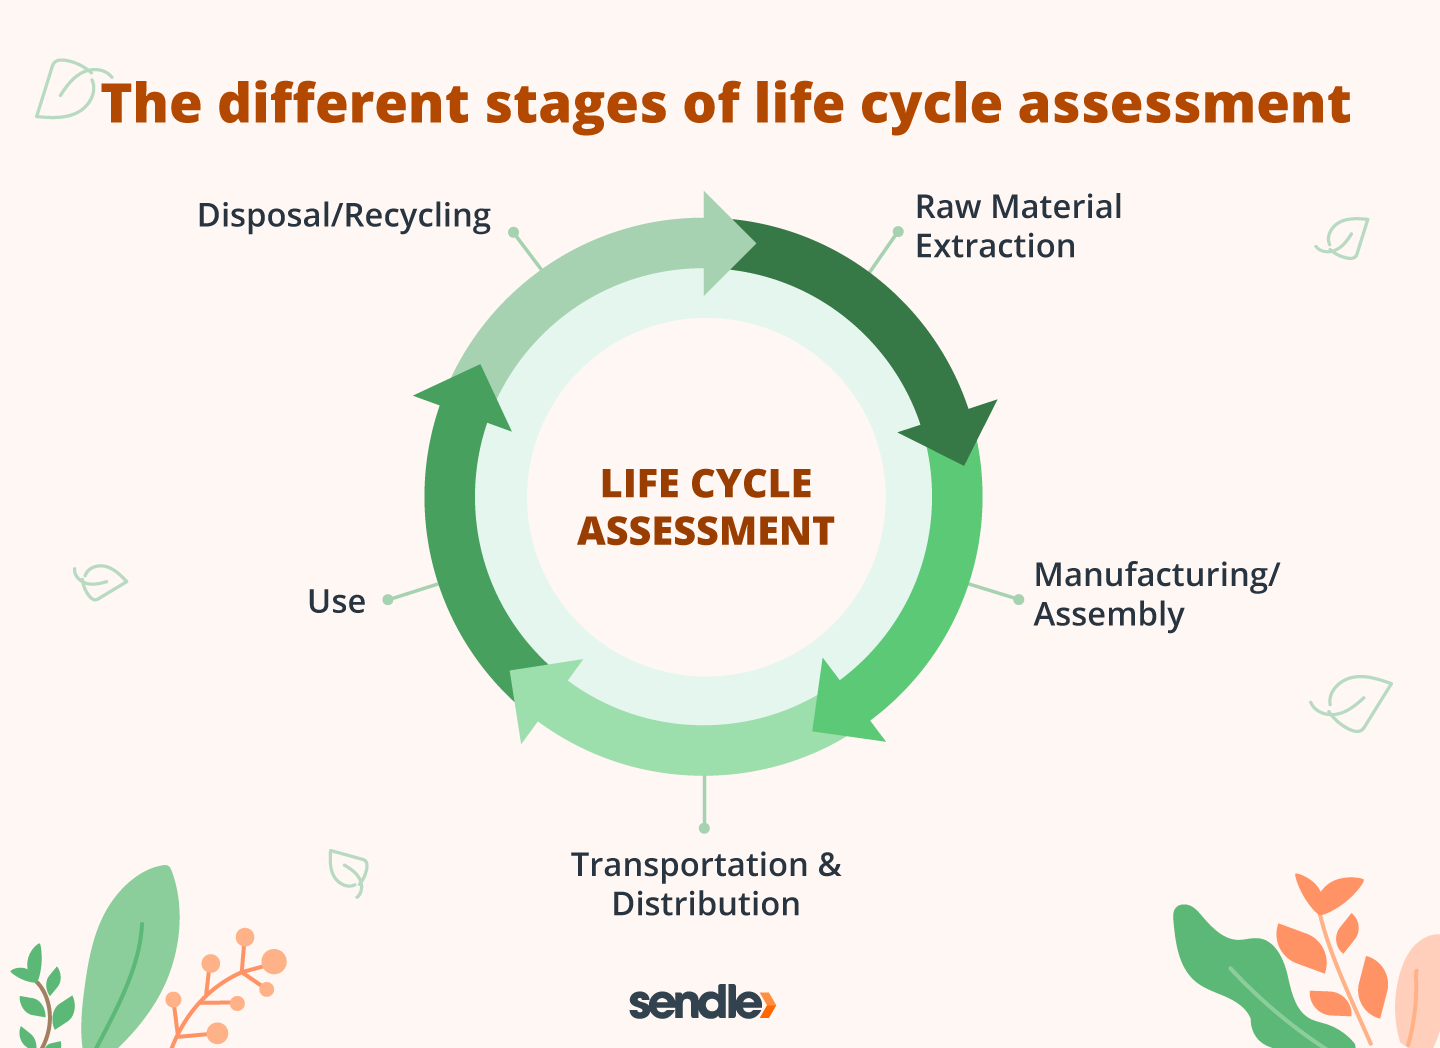 The different stages of Life Cycle Assessment based on STiTCH